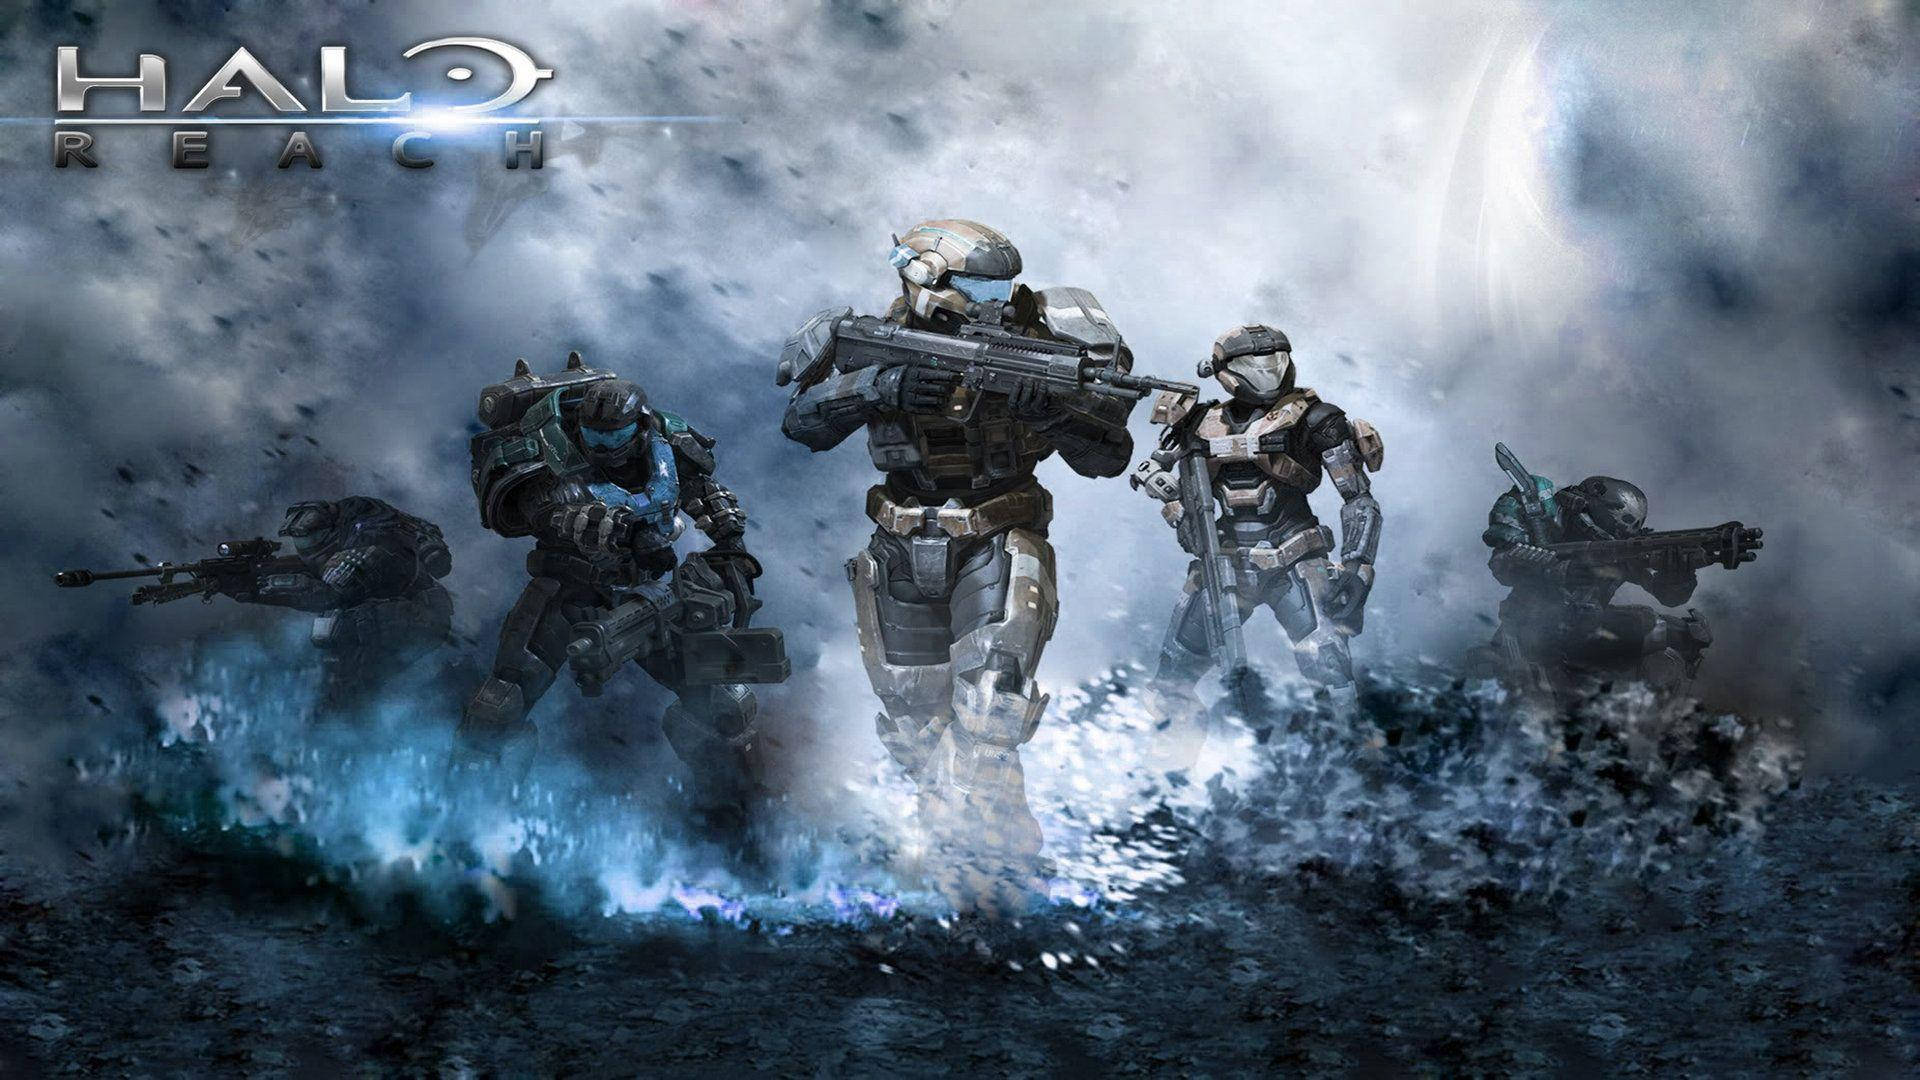 Top 999+ Halo Reach Wallpaper Full HD, 4K Free to Use